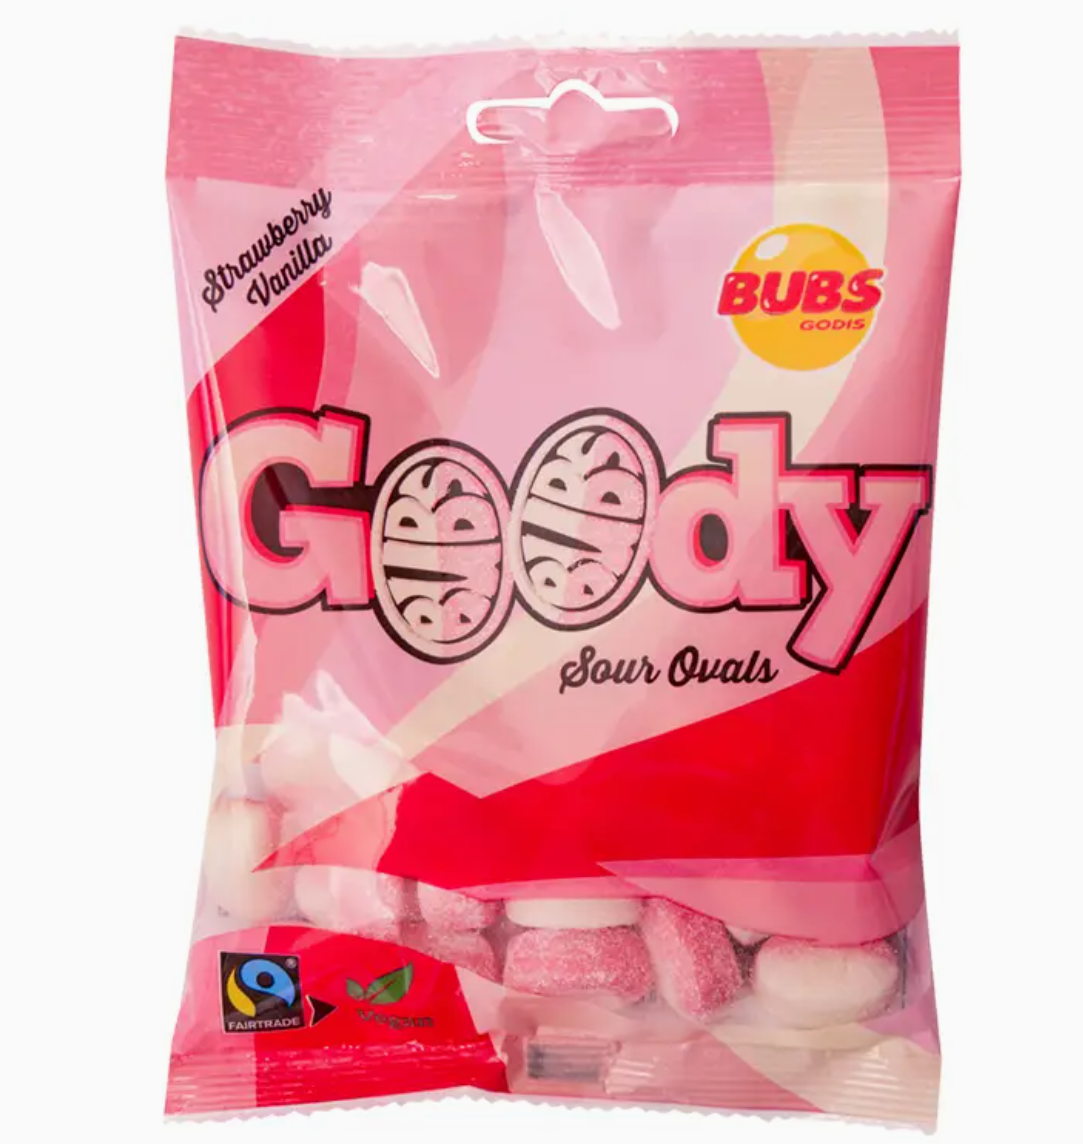 Bubs Godis Strawberry with Vanilla Sour Ovals 90g